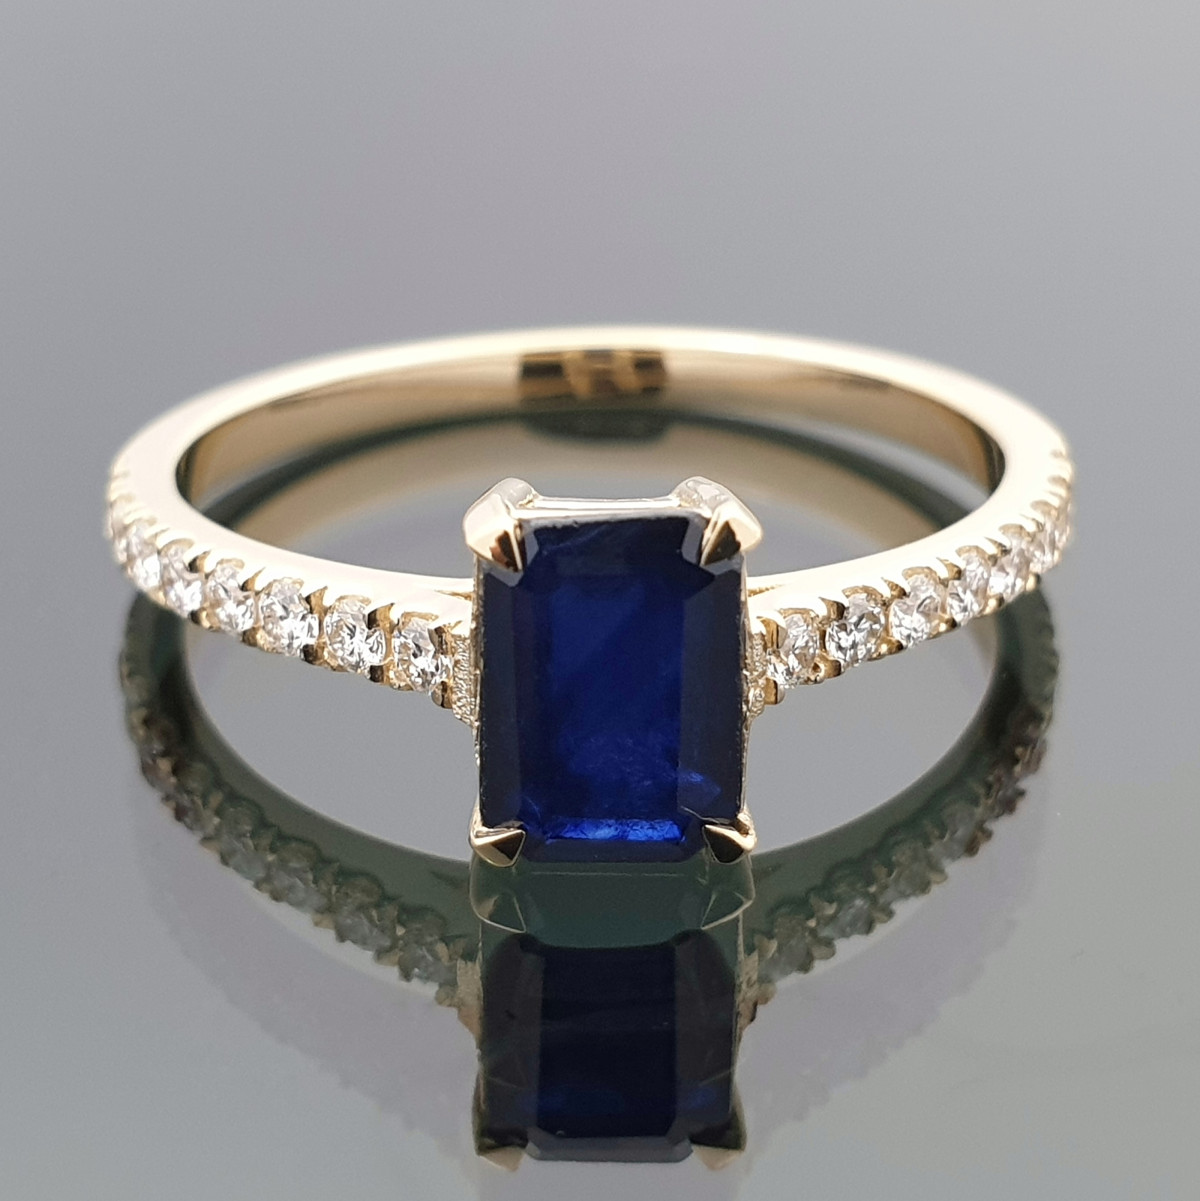  Gold ring decorated with blue sapphire and diamonds (1595) 1